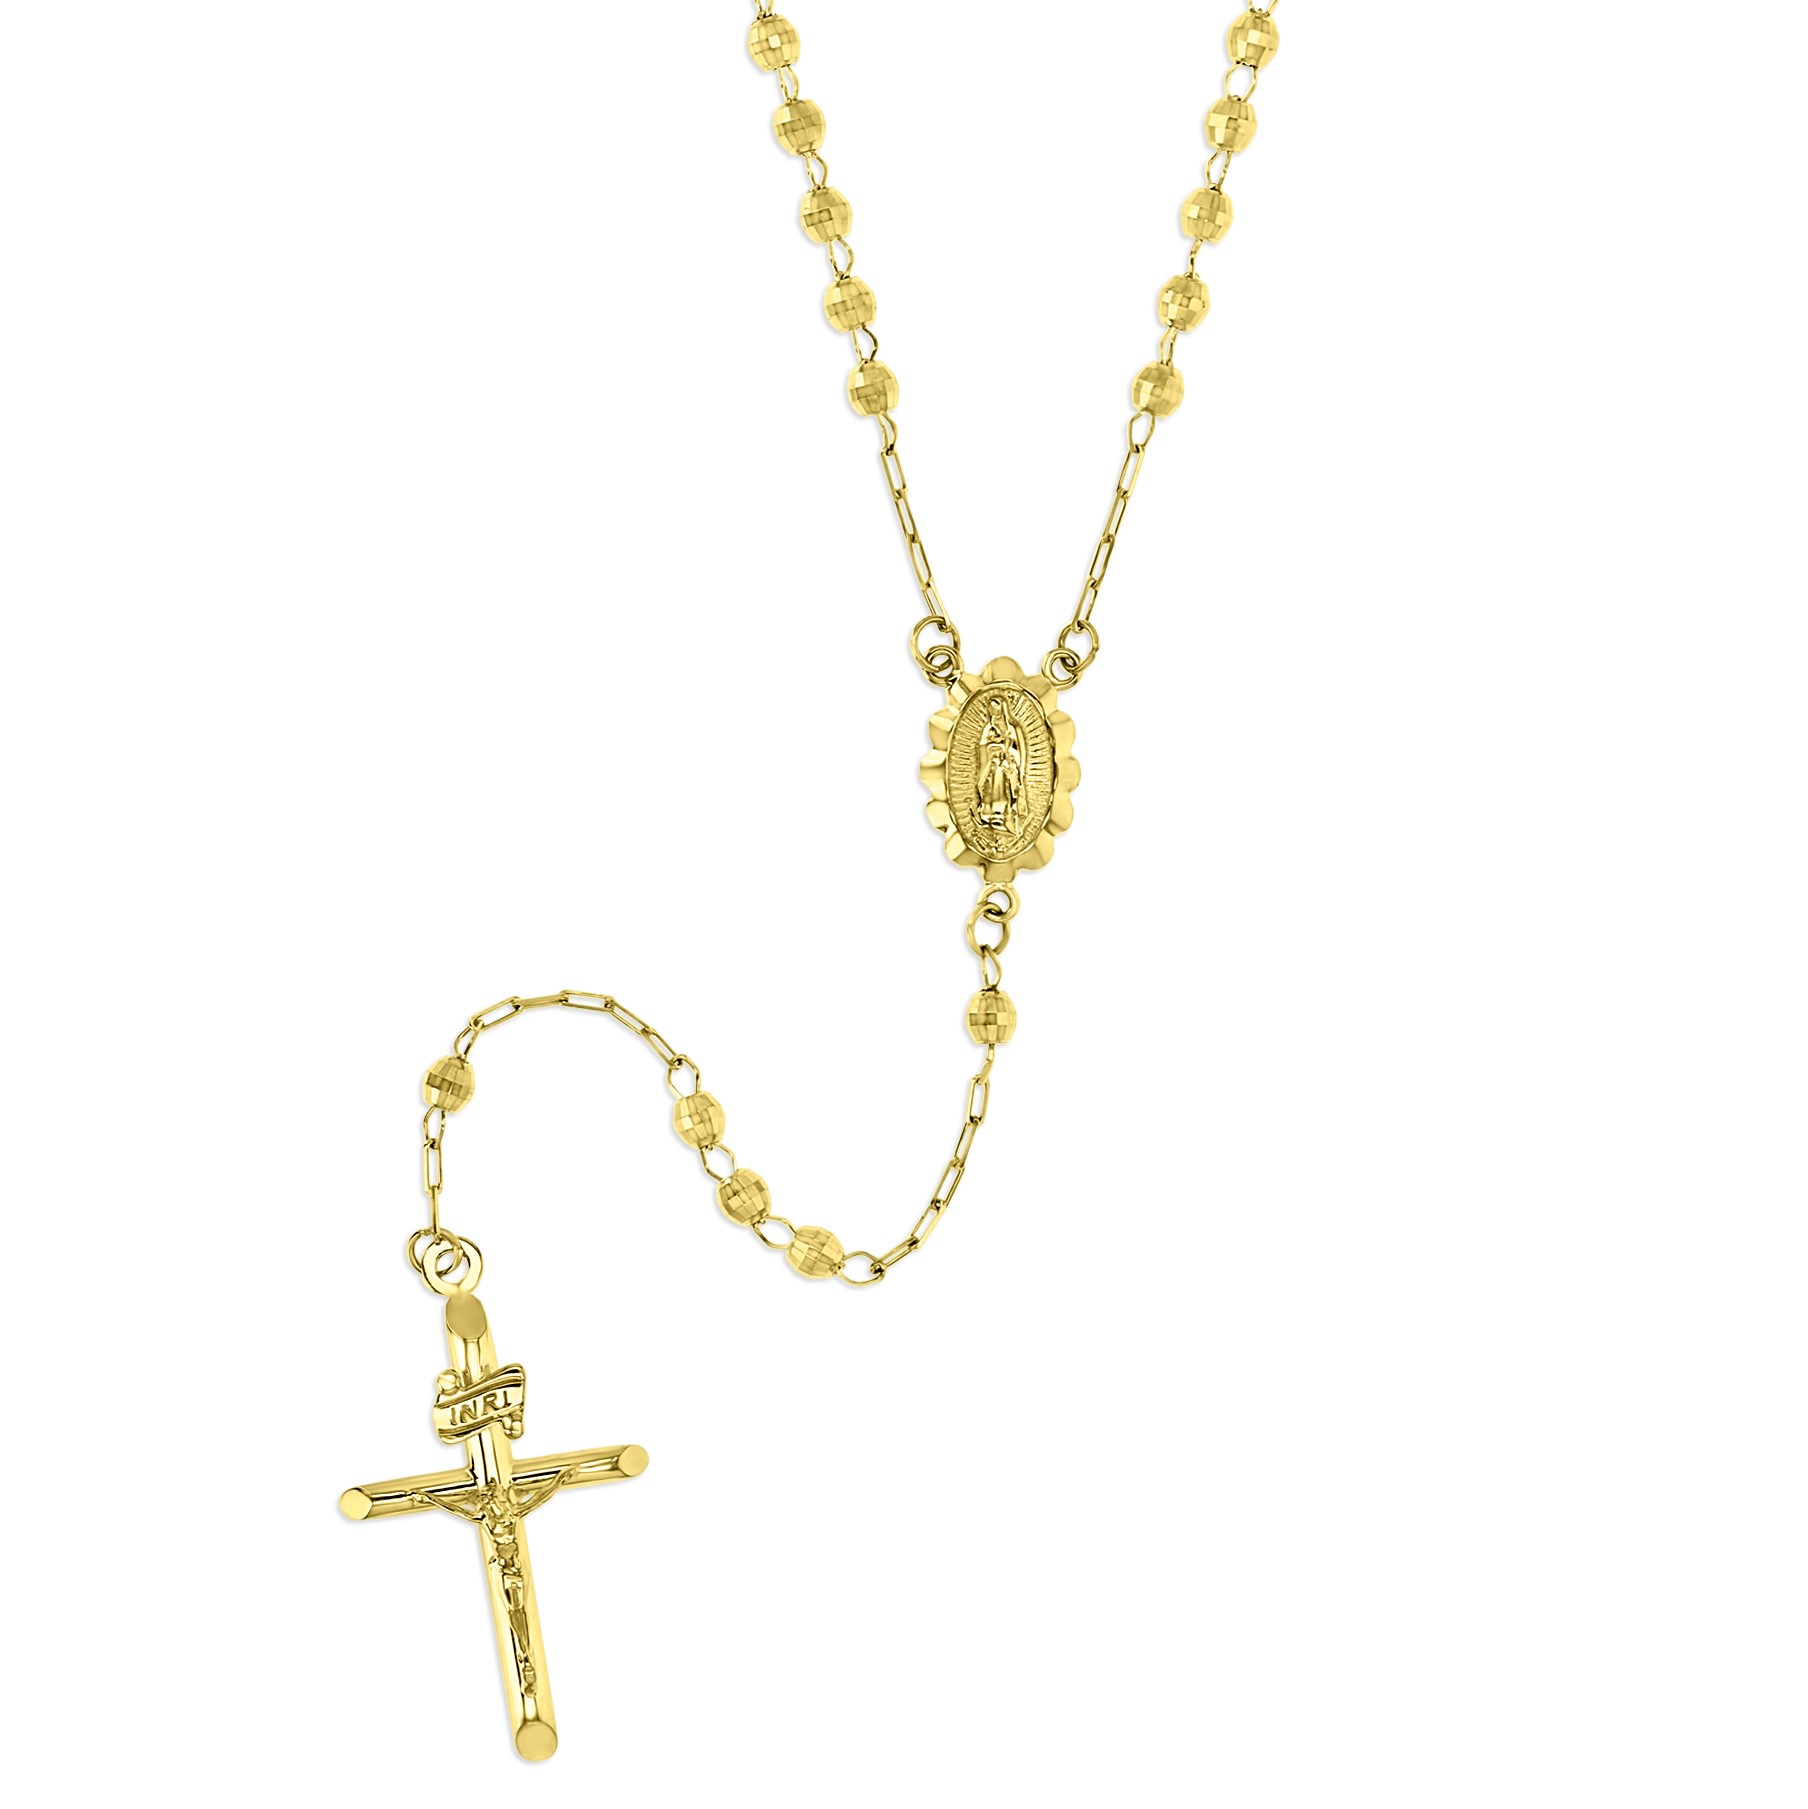 14K Yellow Gold 3MM Diamond Cut Beads Rosary 18" Necklace